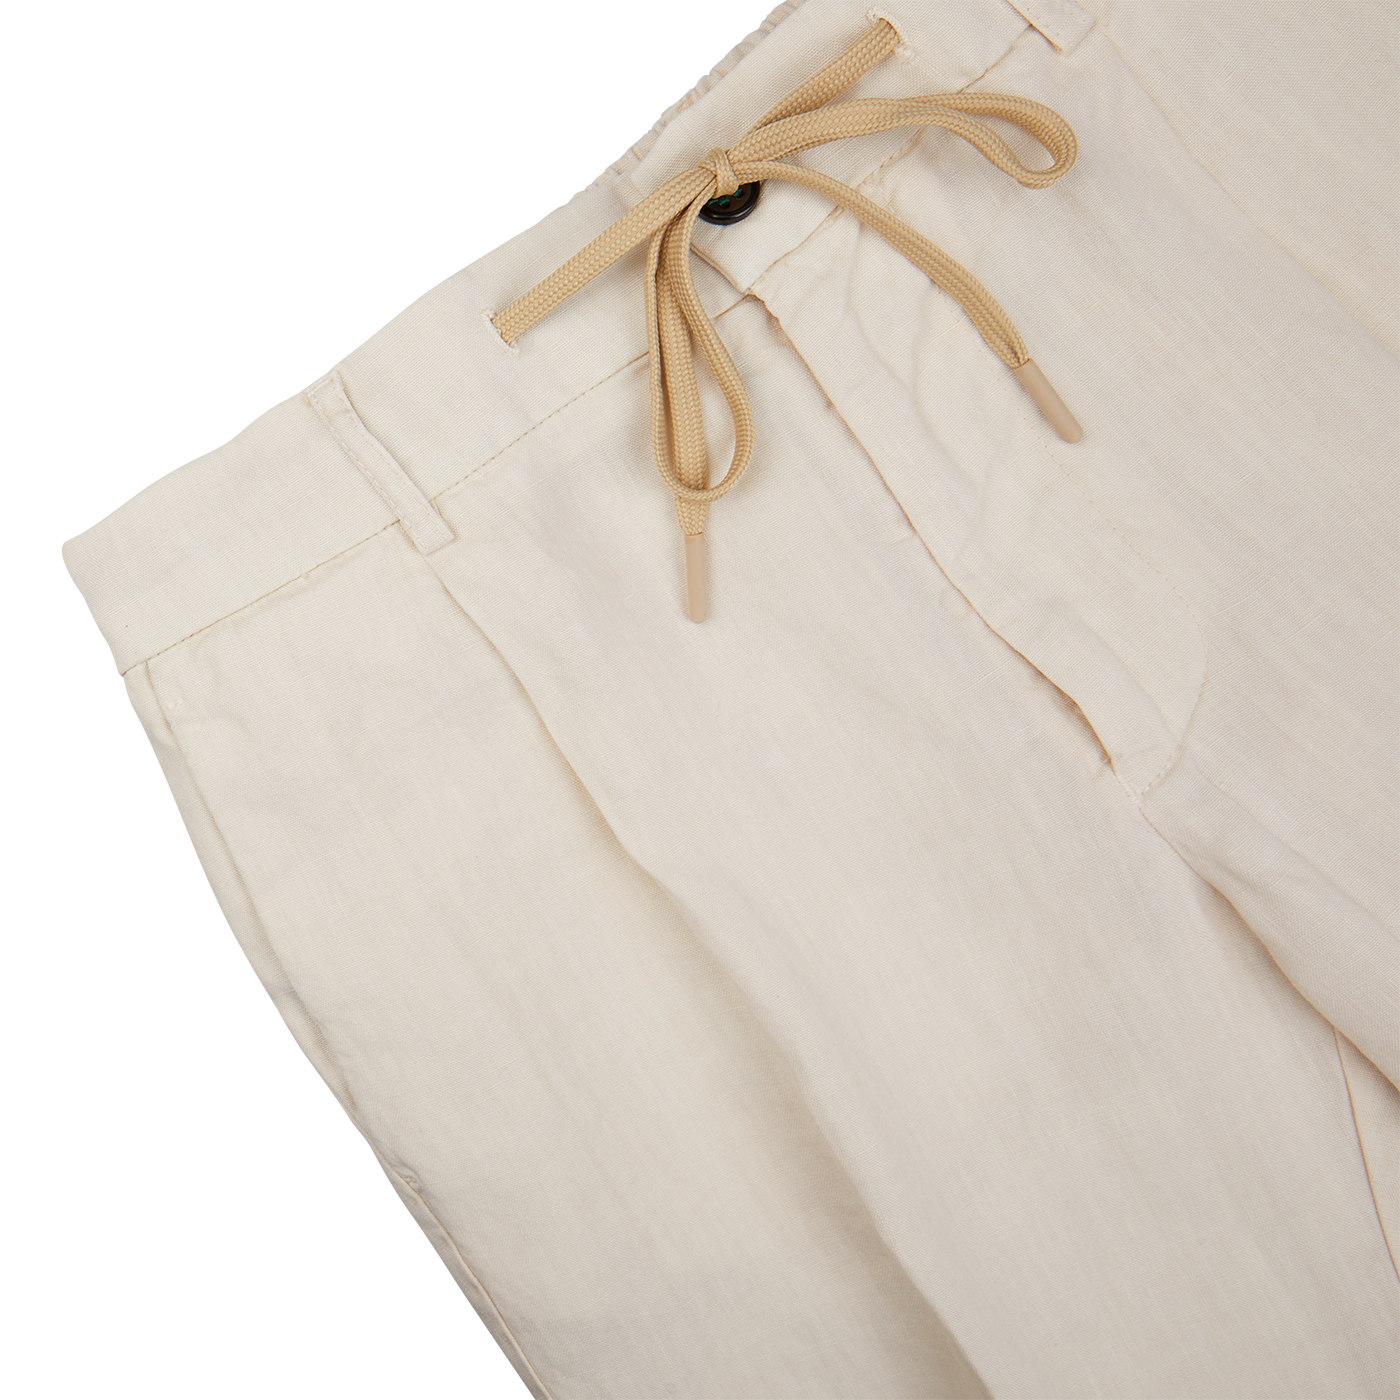 A pair of Cream Linen Twill Drawstring Trousers with tan drawstring ties by Berwich.